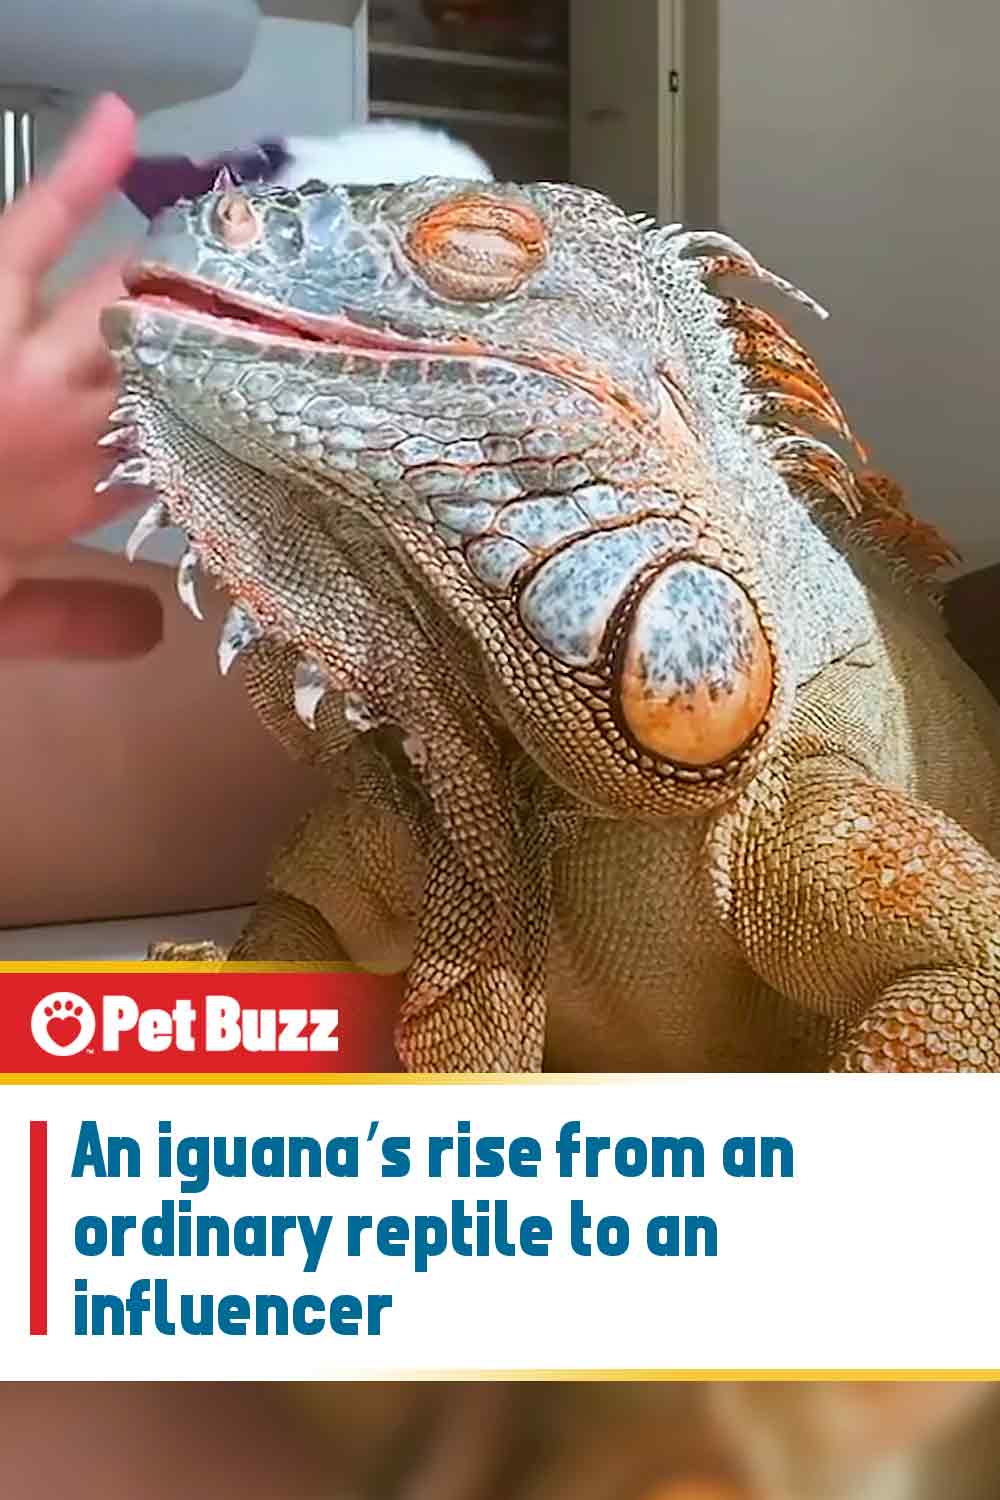 An iguana’s rise from an ordinary reptile to an influencer